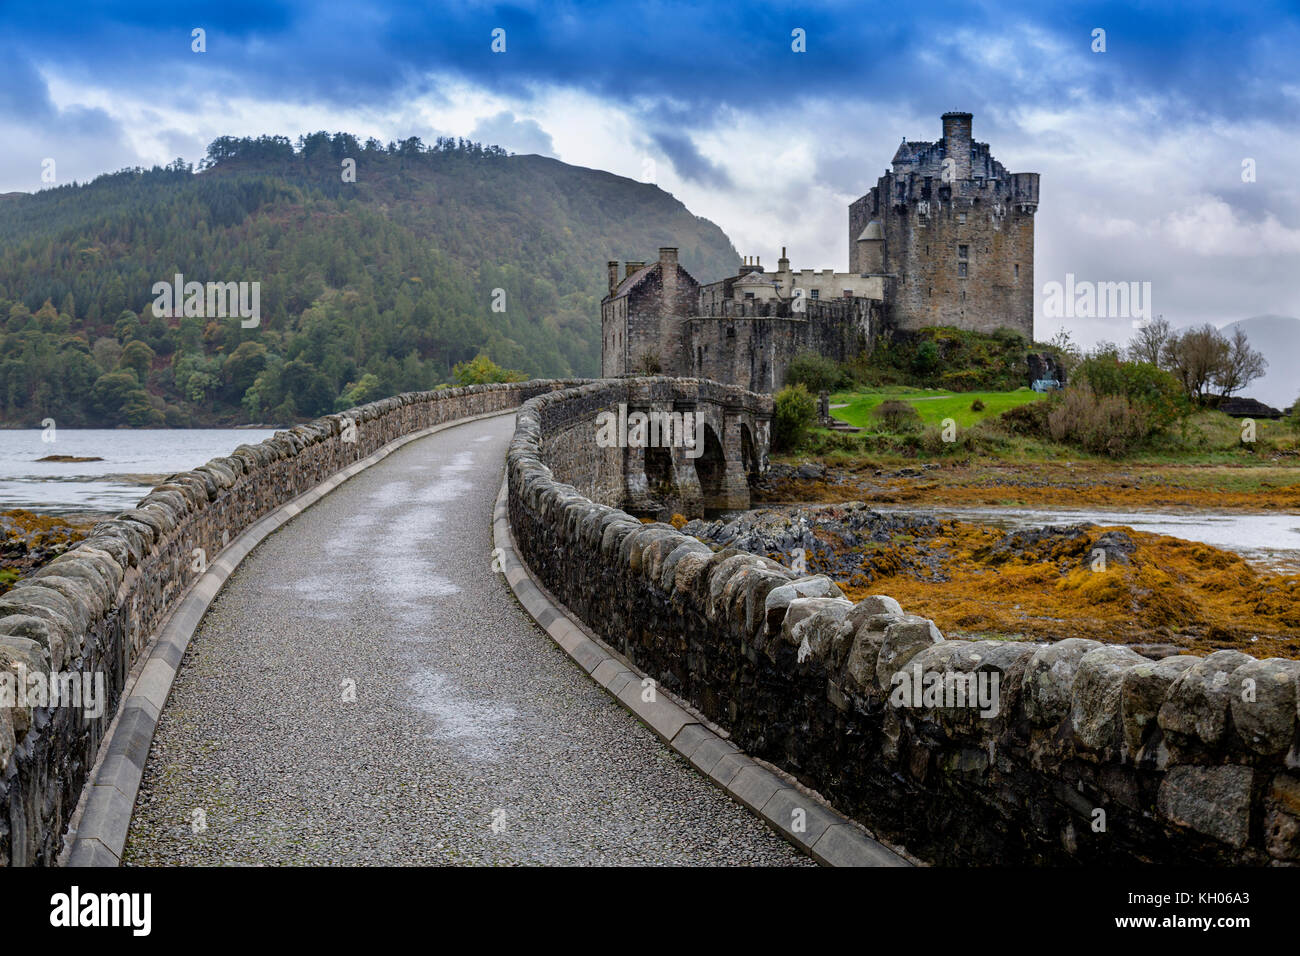 The bridge to Eilean Donan, a 13th century restored island castle at the junction of Lochs Duich, Long and Alsh near Kyle of Lochalsh, Scotland, UK Stock Photo